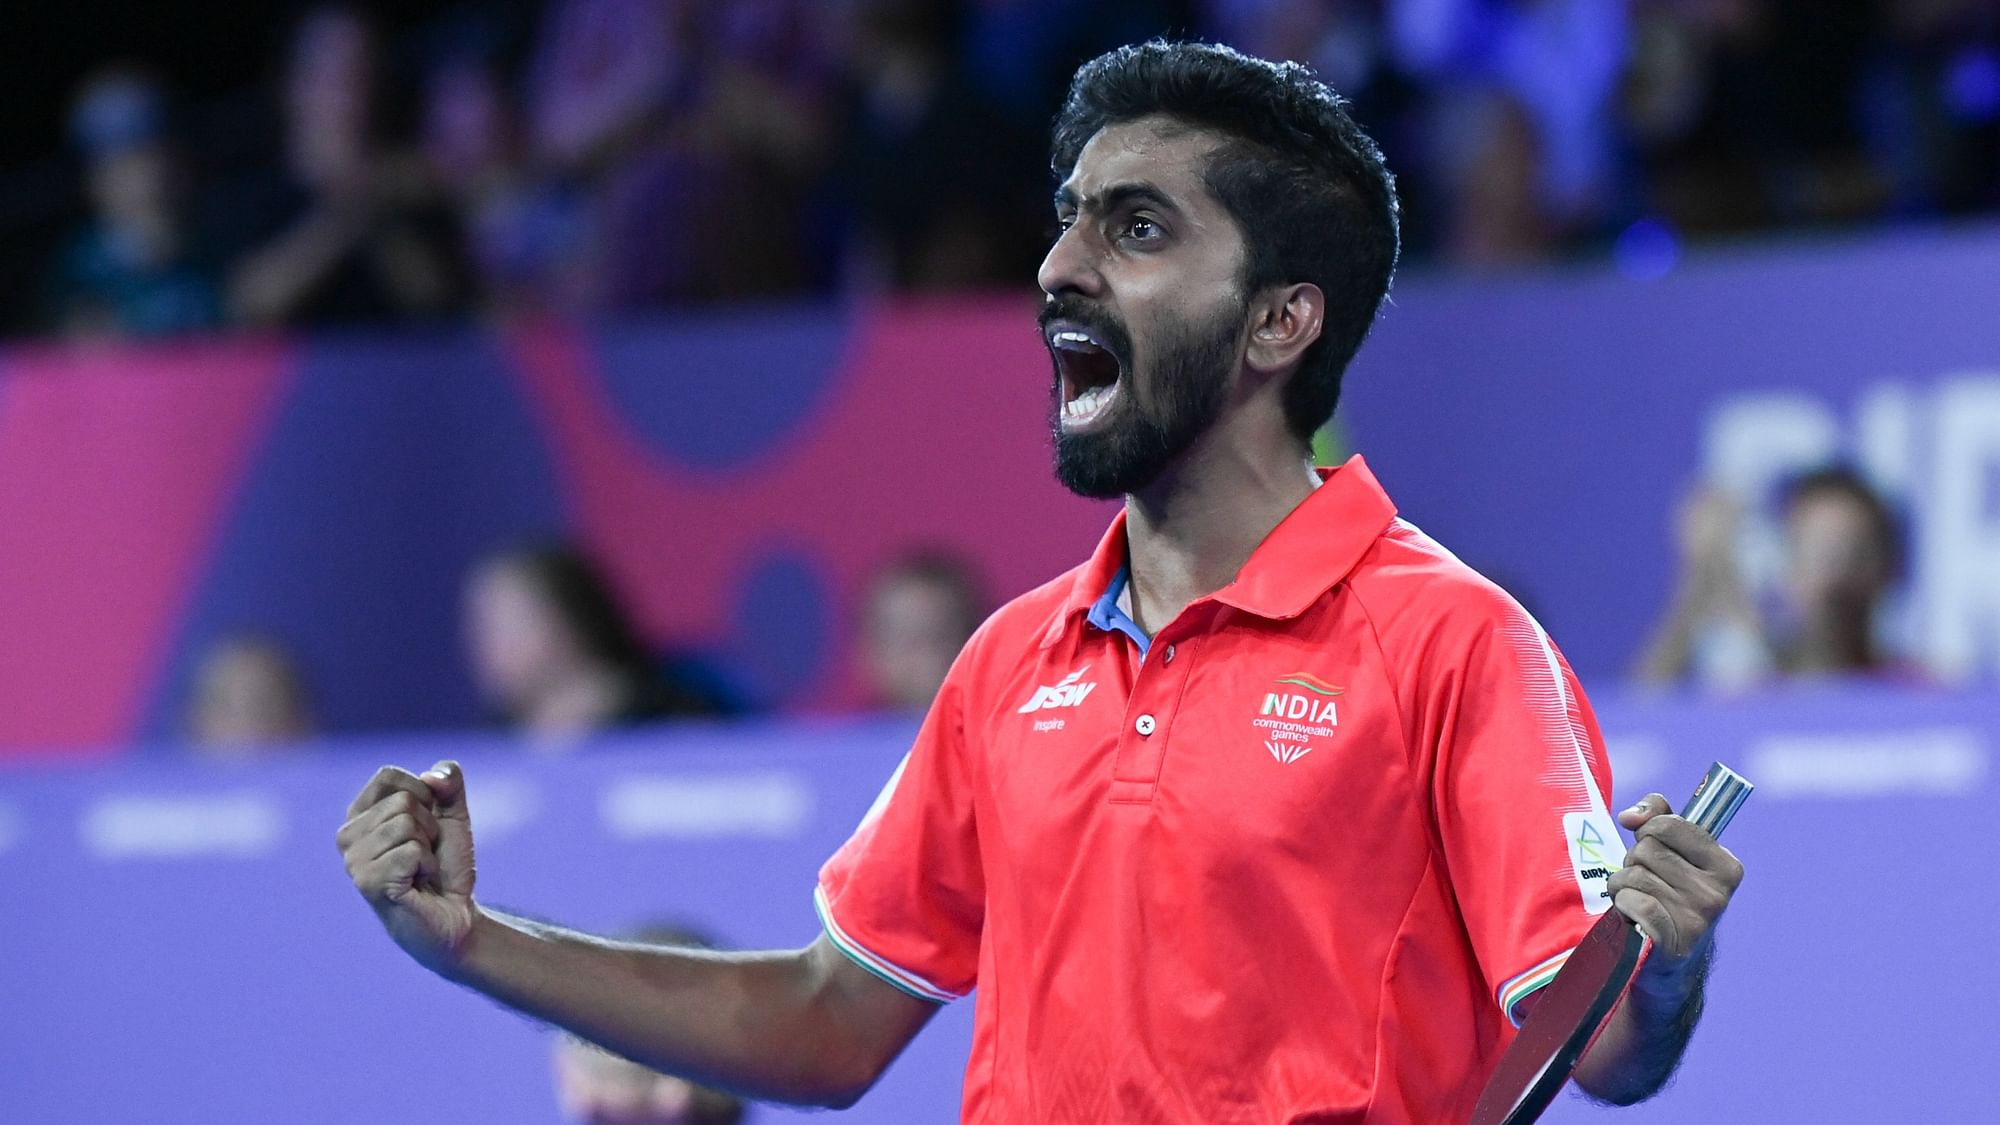 <div class="paragraphs"><p>Sathiyan Gnanasekaran of India reacts after defeating Paul Drinkhall of England in their men's singles table tennis bronze medal match at the 2022 CWG.</p></div>